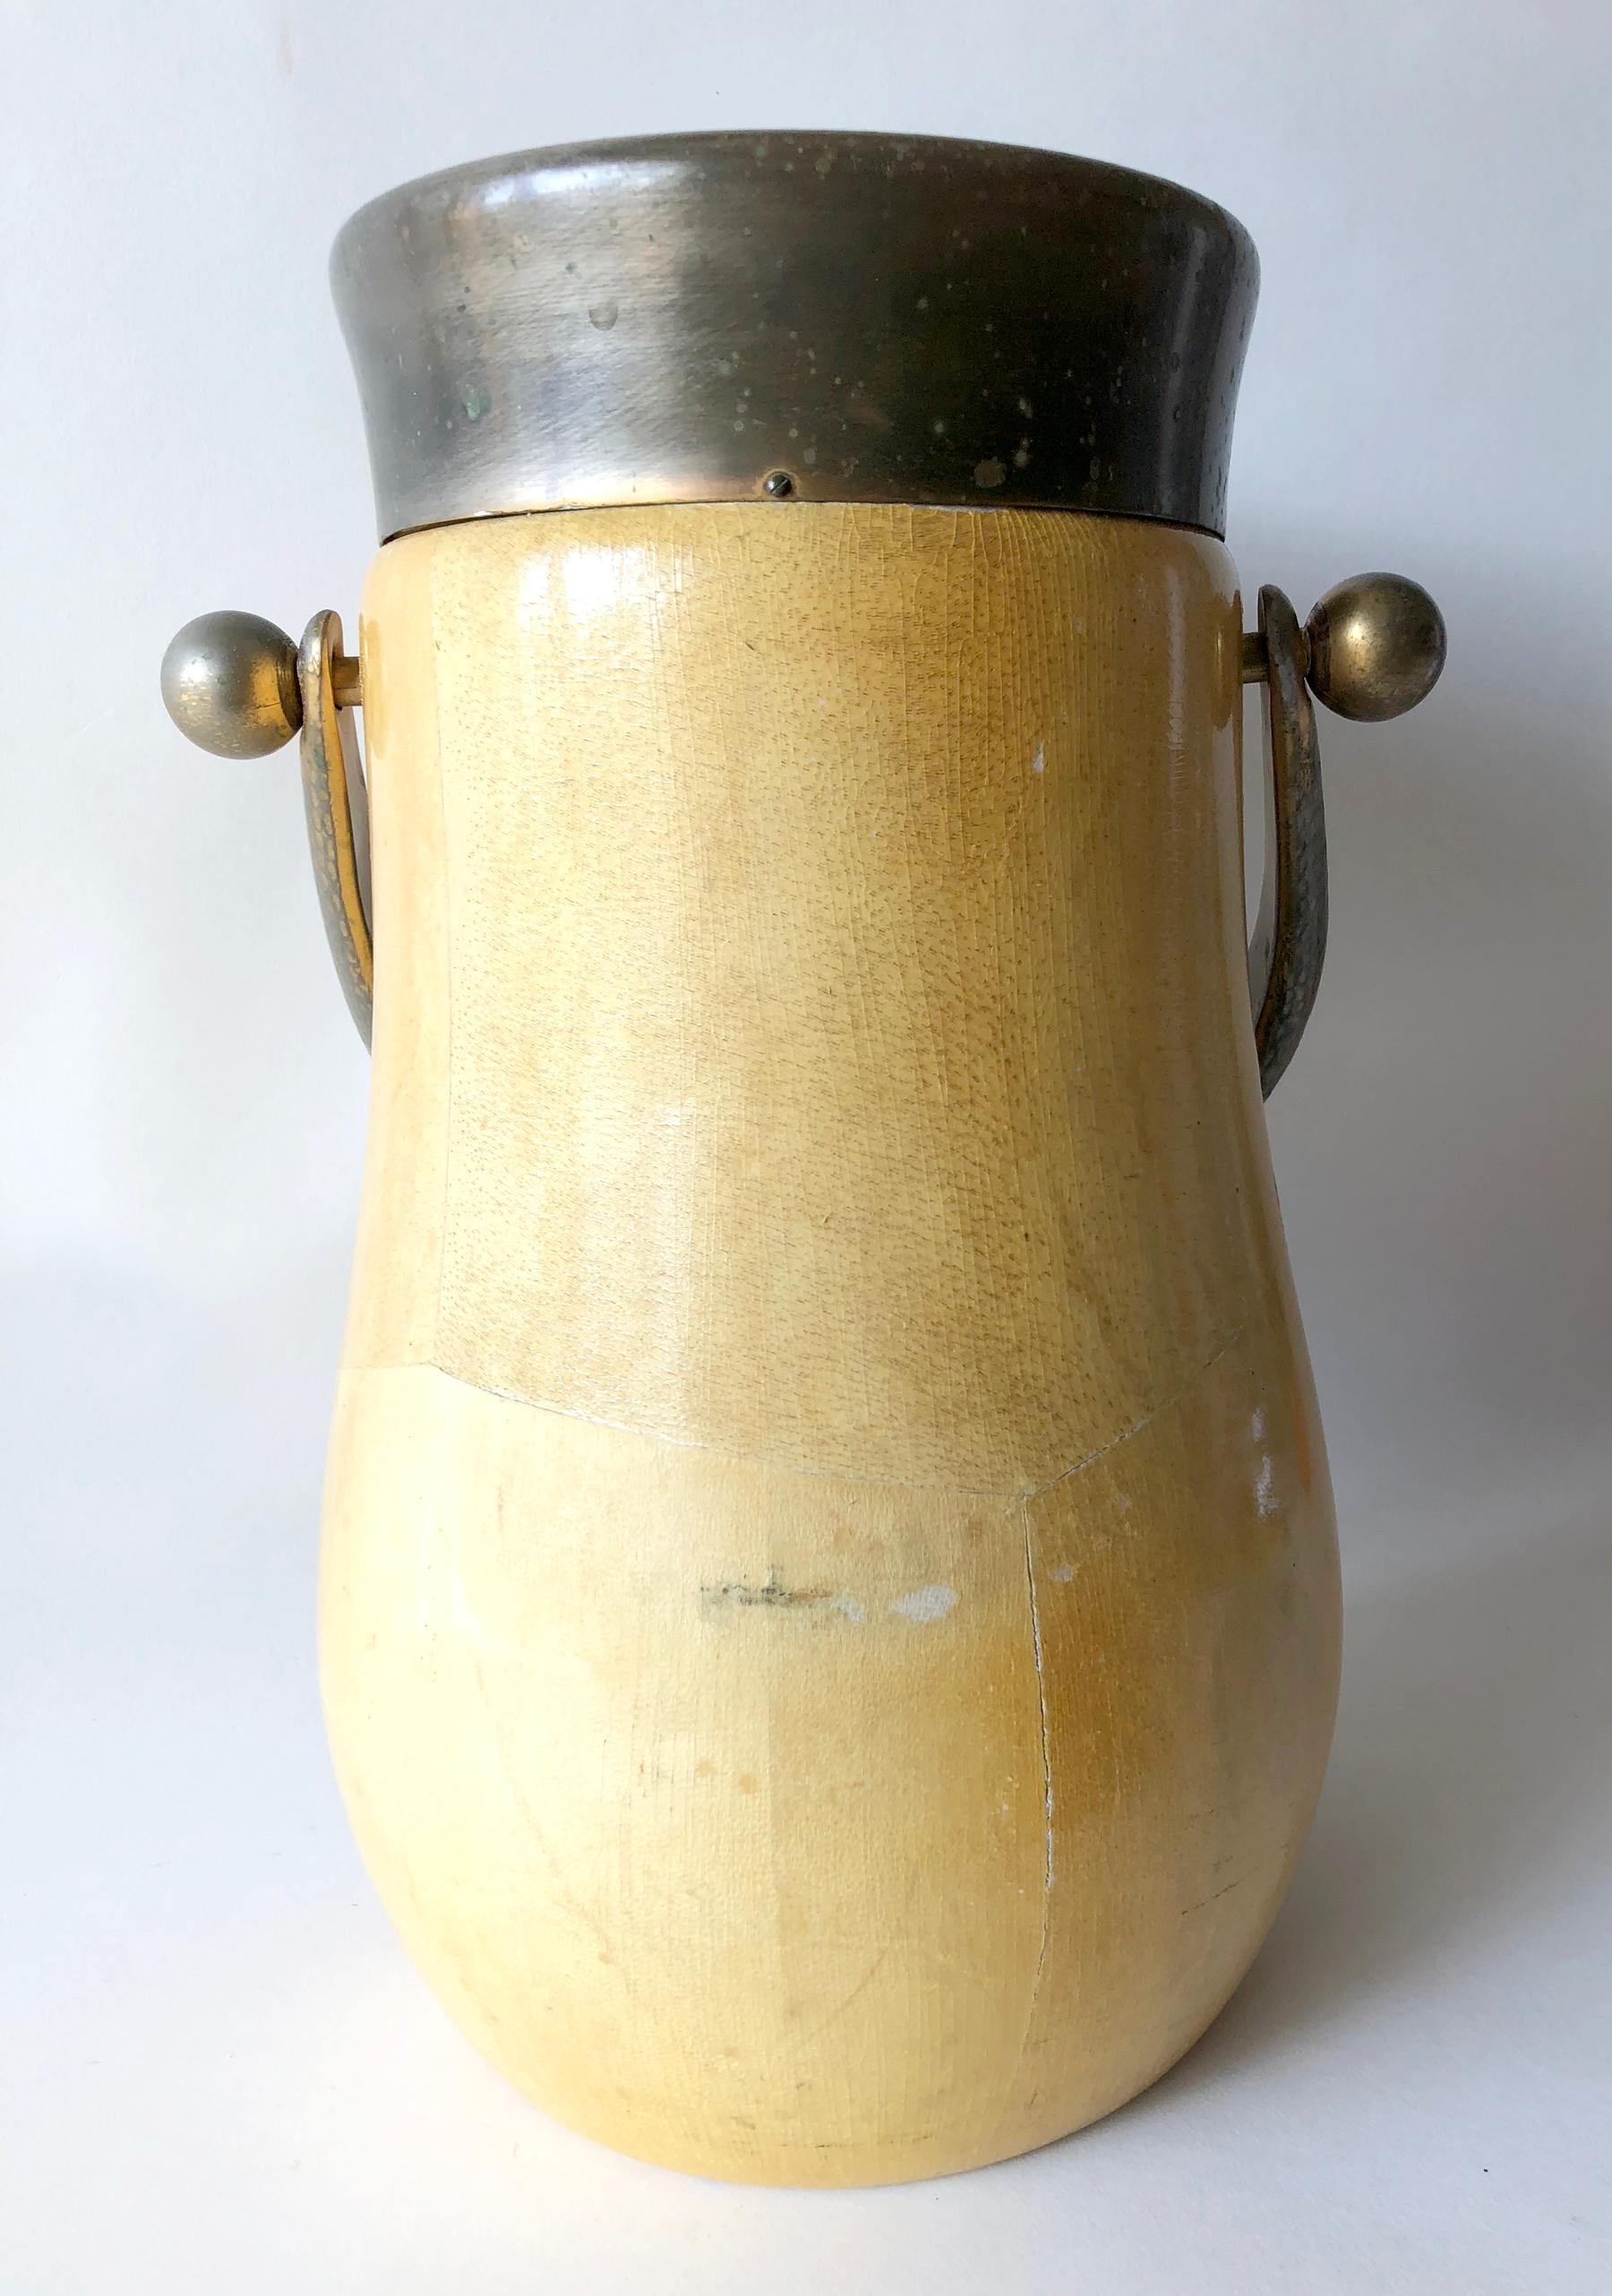 Lacquered goatskin and hand-hammered brass 
barware champagne or wine cooler designed by Aldo Tura of Italy. Piece measures 14.5